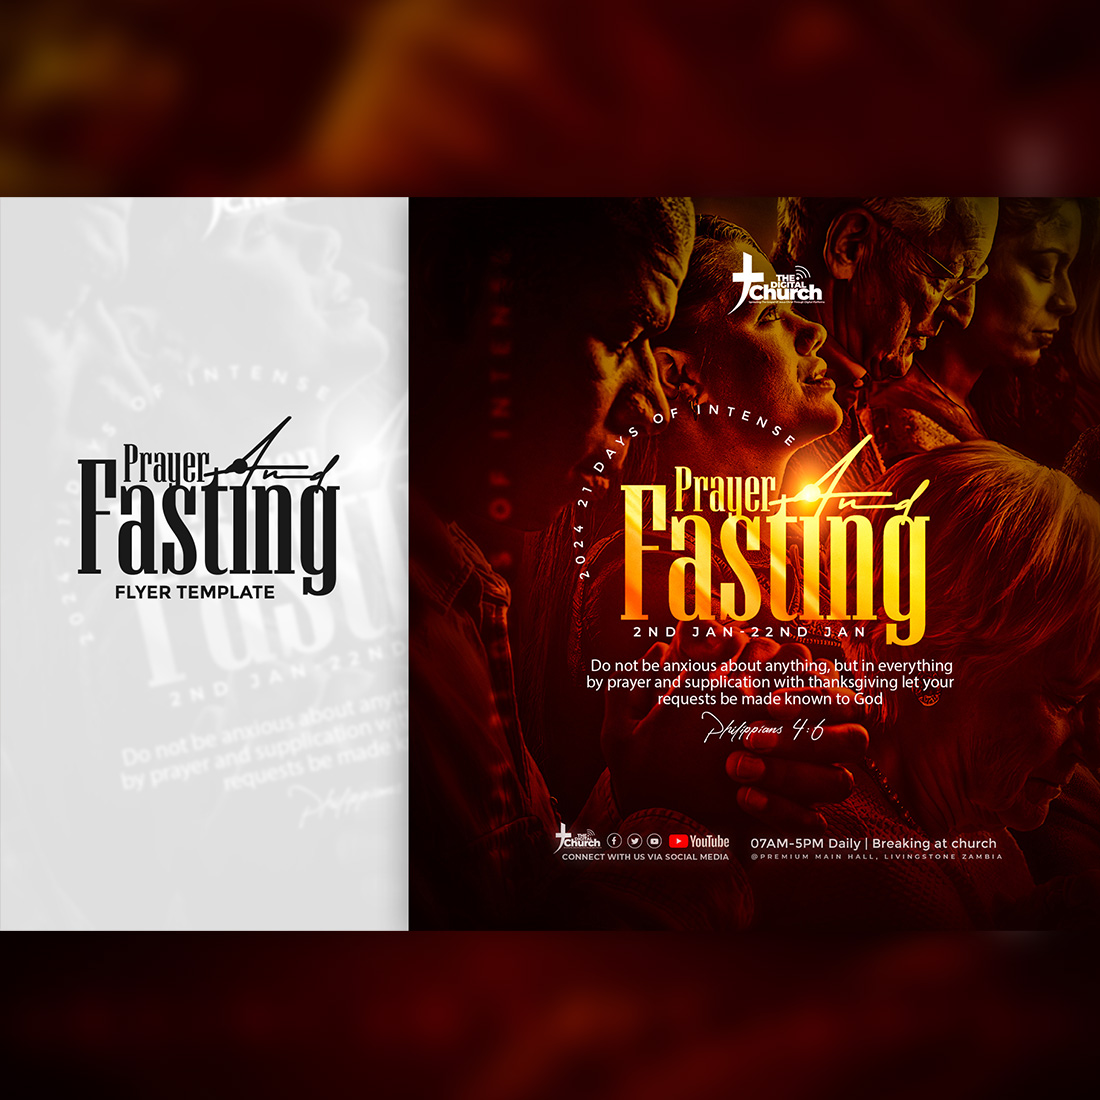 prayer and fasting program flyer template s 848